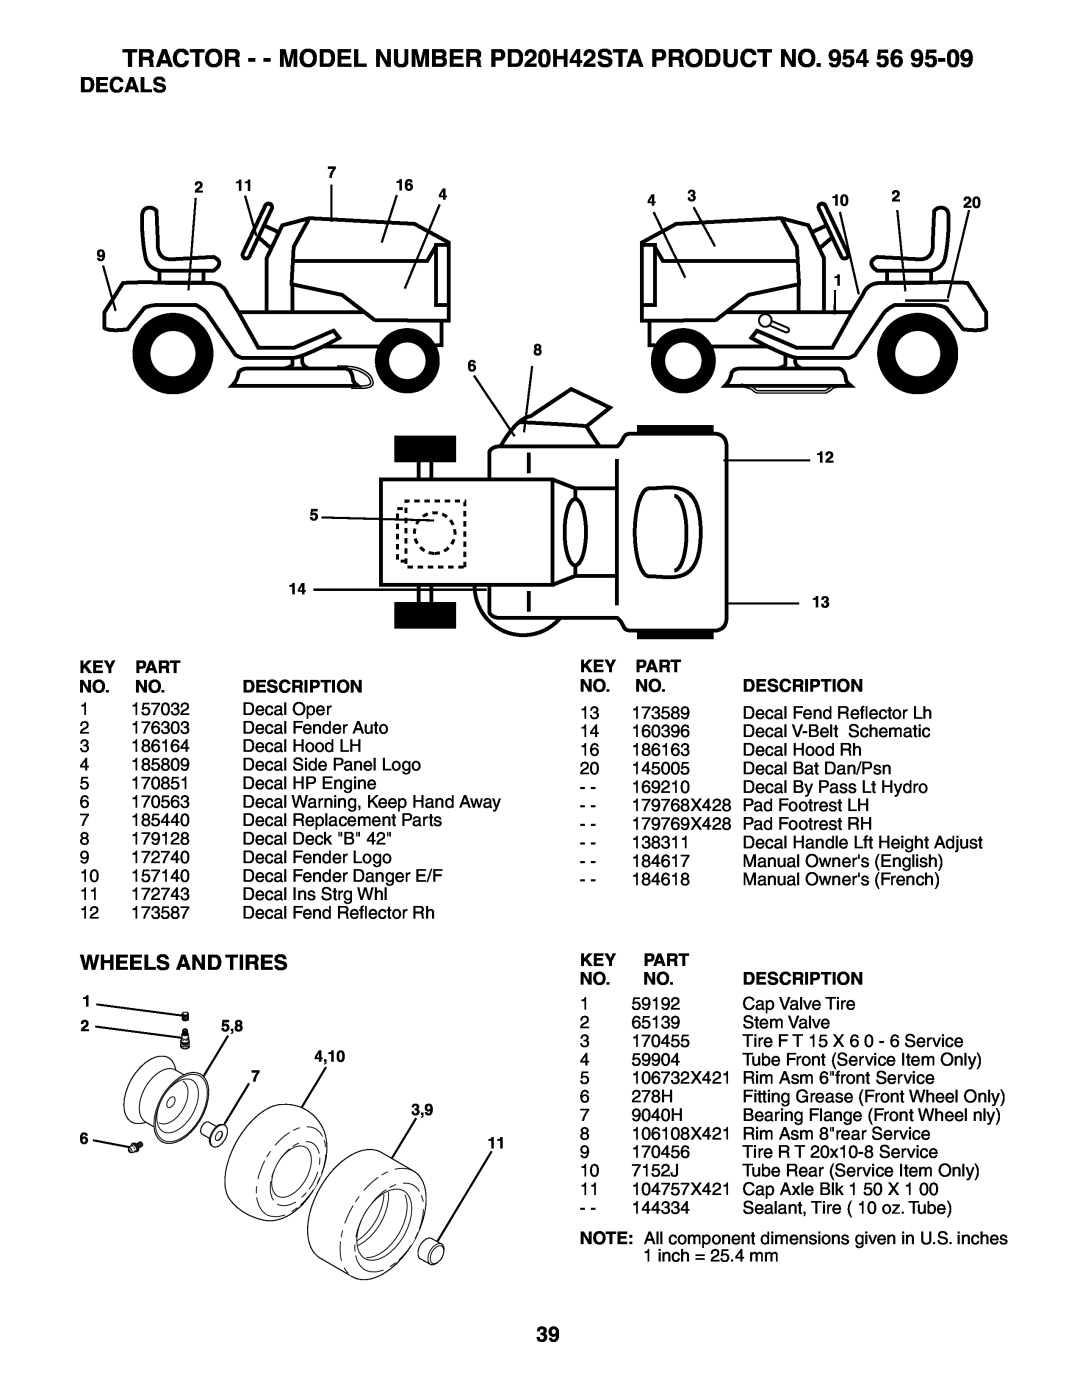 Poulan 184617 owner manual Decals, Wheels And Tires, TRACTOR - - MODEL NUMBER PD20H42STA PRODUCT NO. 954 56, 25,8 4,10 